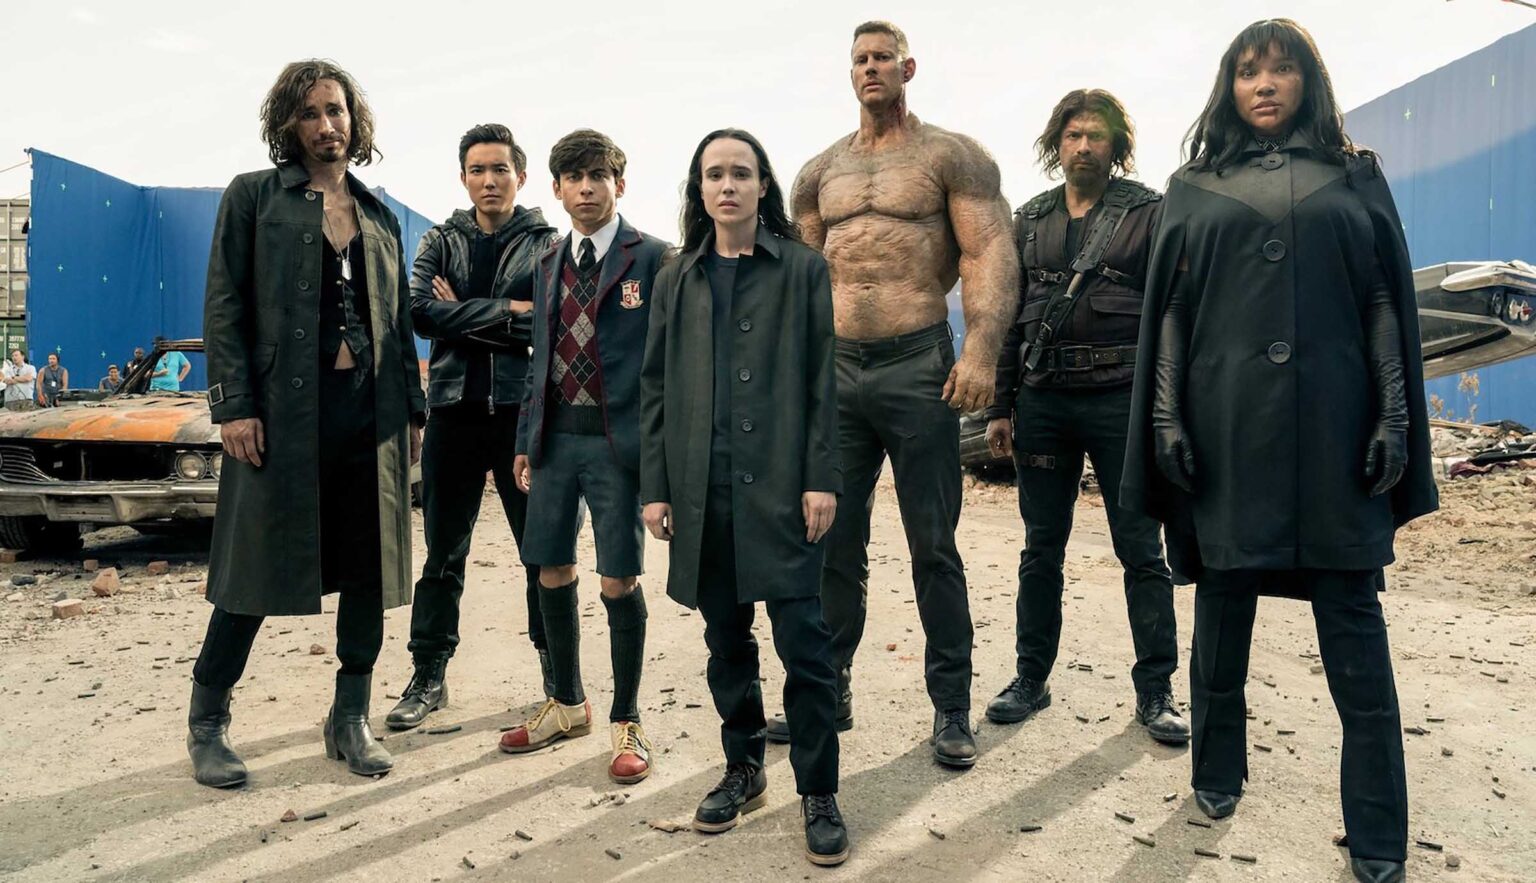 'The Umbrella Academy' is slated for Season 3 on Netflix. Are our favorite cast members coming back this season?